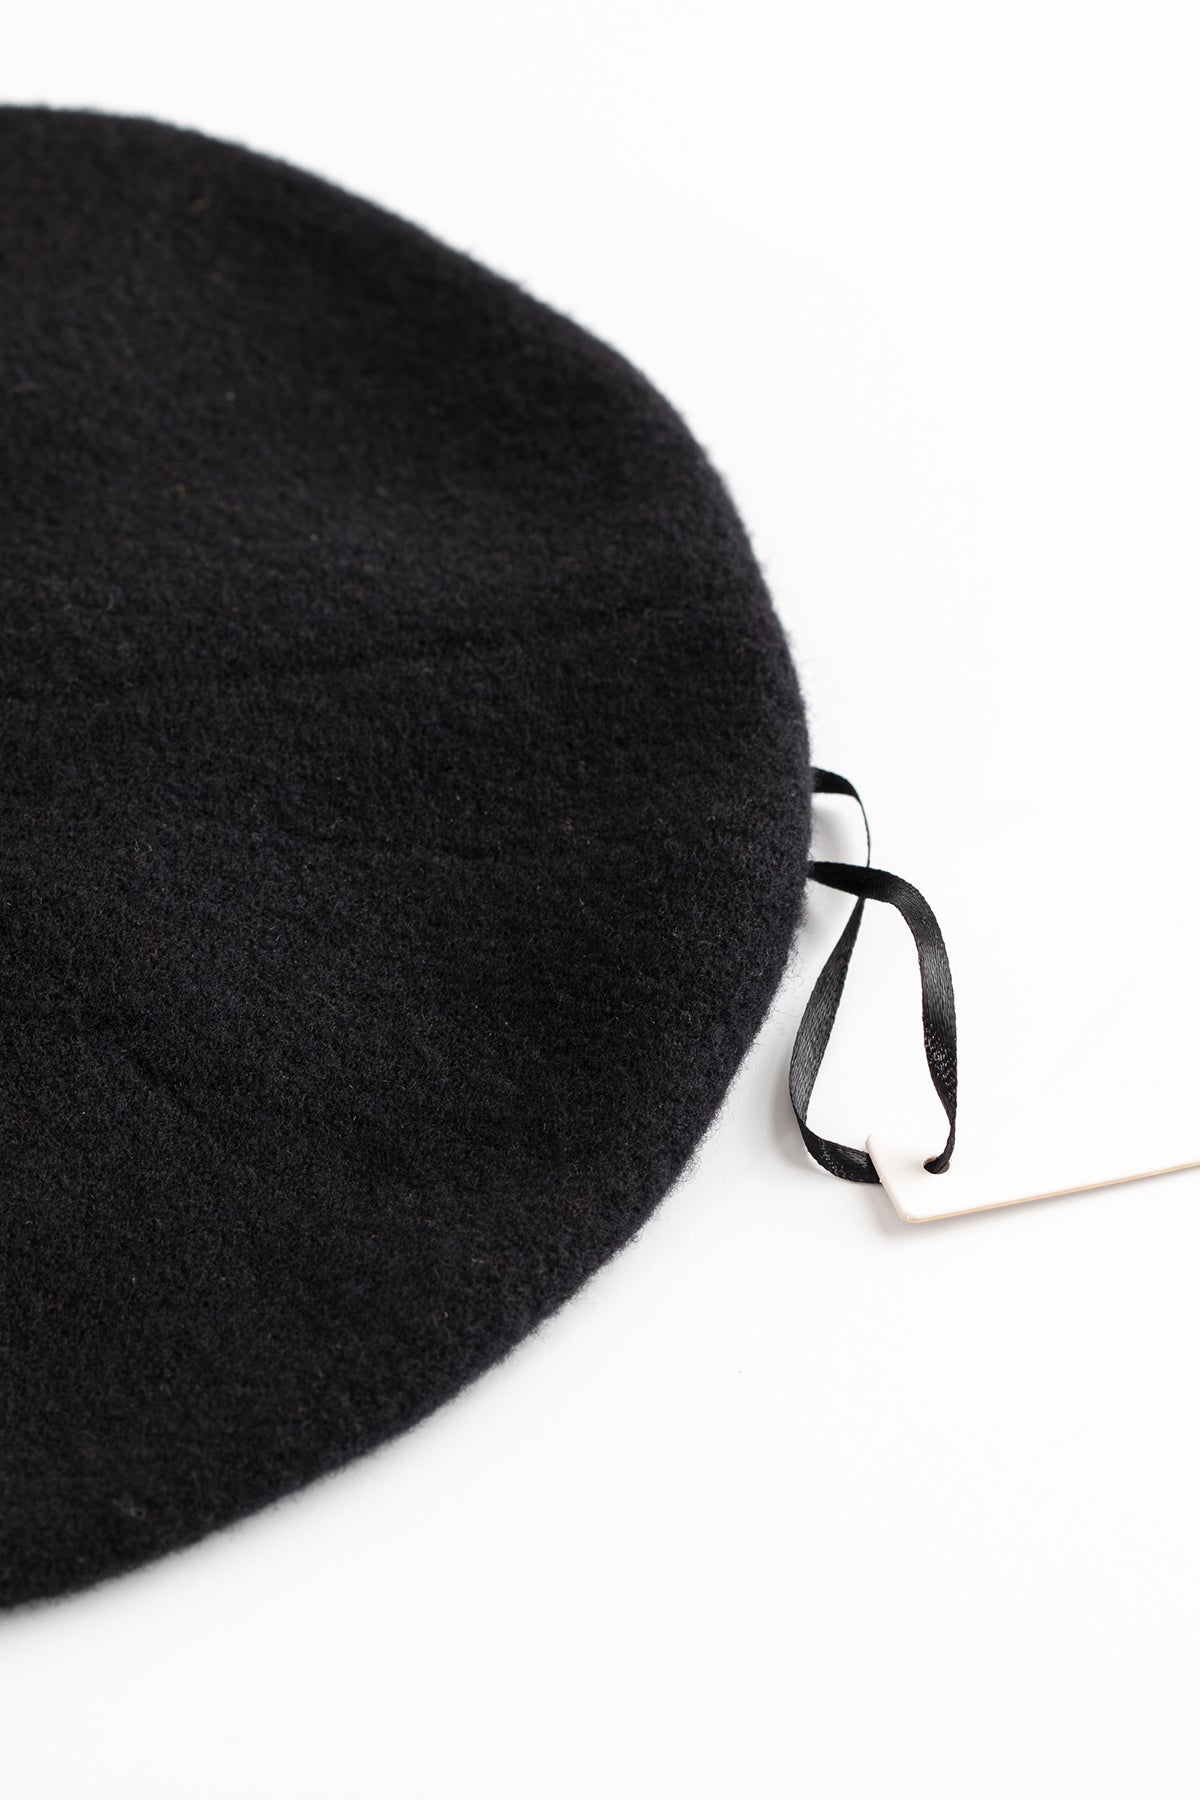 A Gigi beret made from a luxurious merino wool blend, with a stylish tag bearing the name "Hansel from Basel".-616317059153